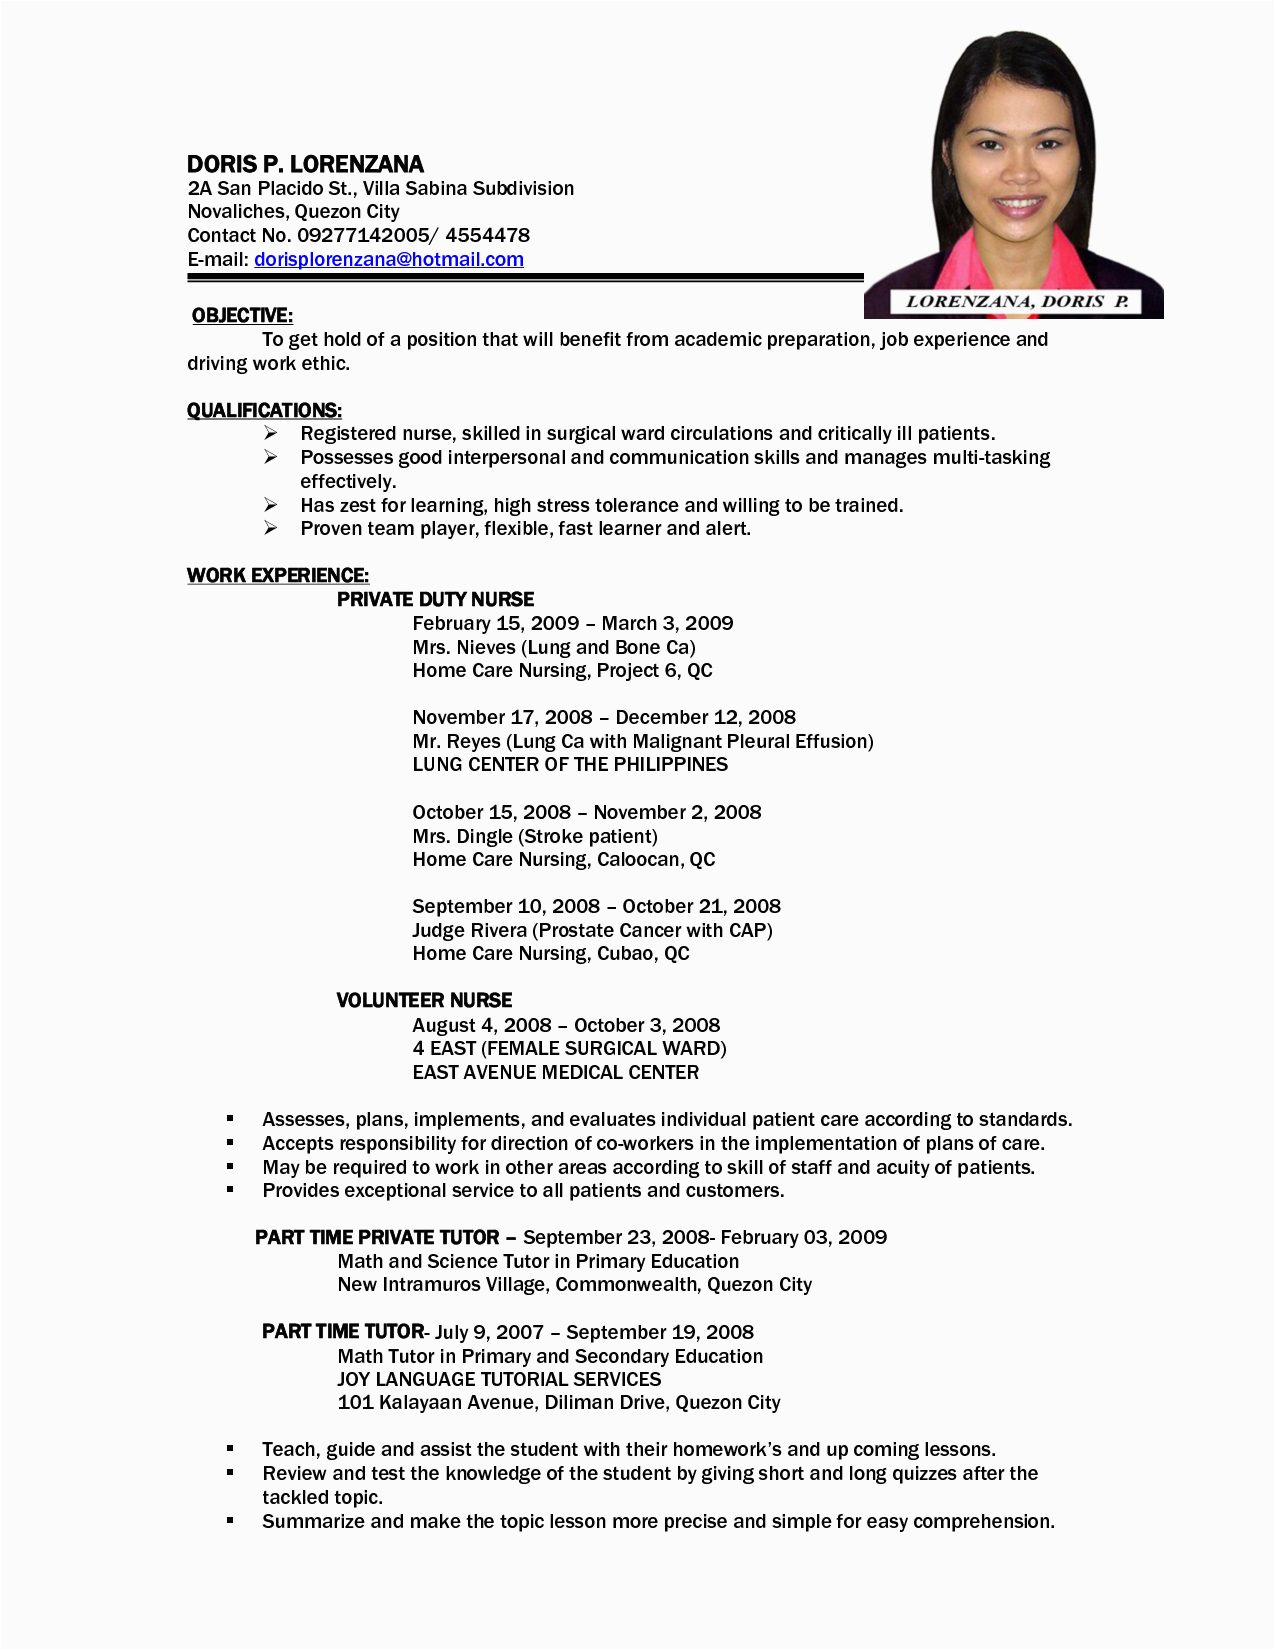 Sample Resume Philippines with Work Experience Resume Objective Sample Philippines Best Resume Examples